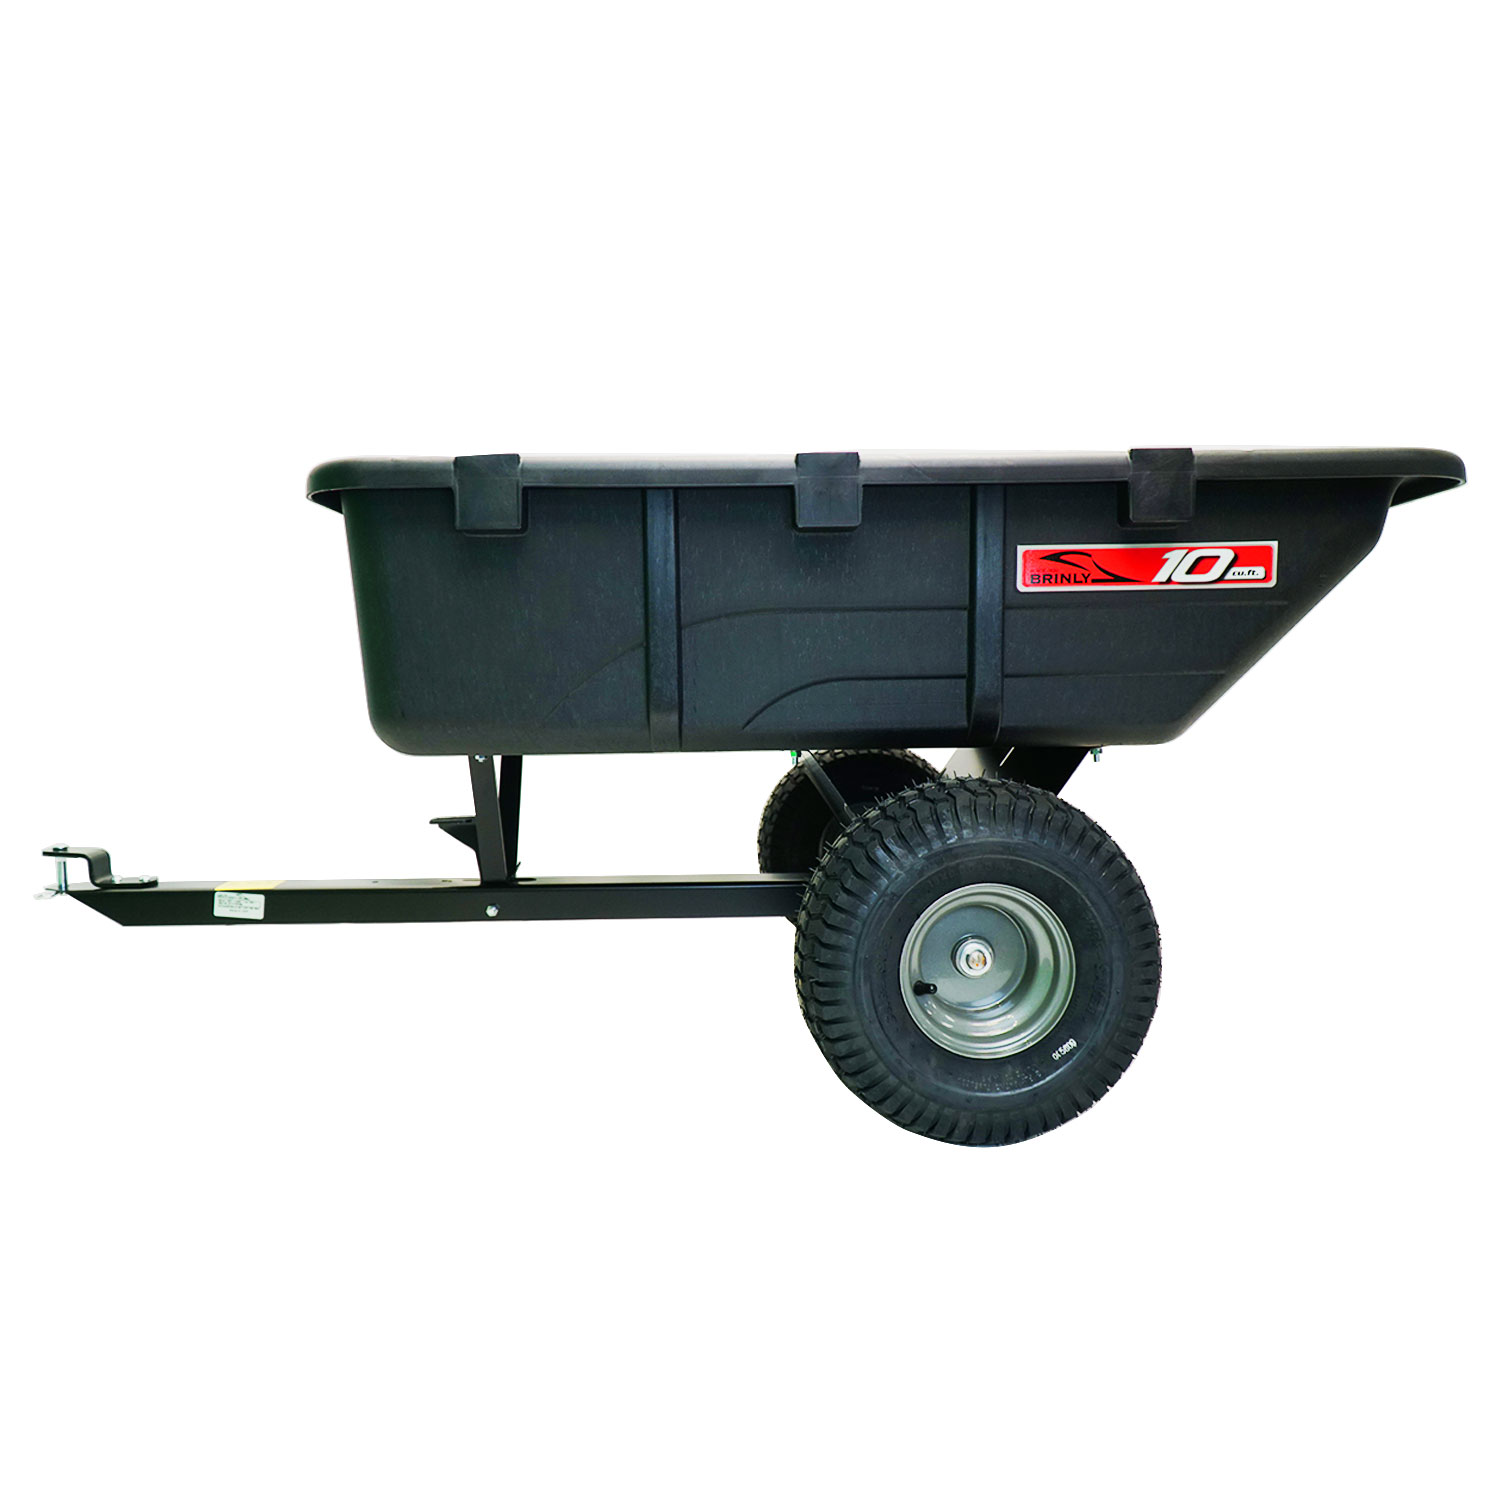 Brinly-Hardy Tow-Behind Utility Cart10 cu Rust Resistant Plastic ft 